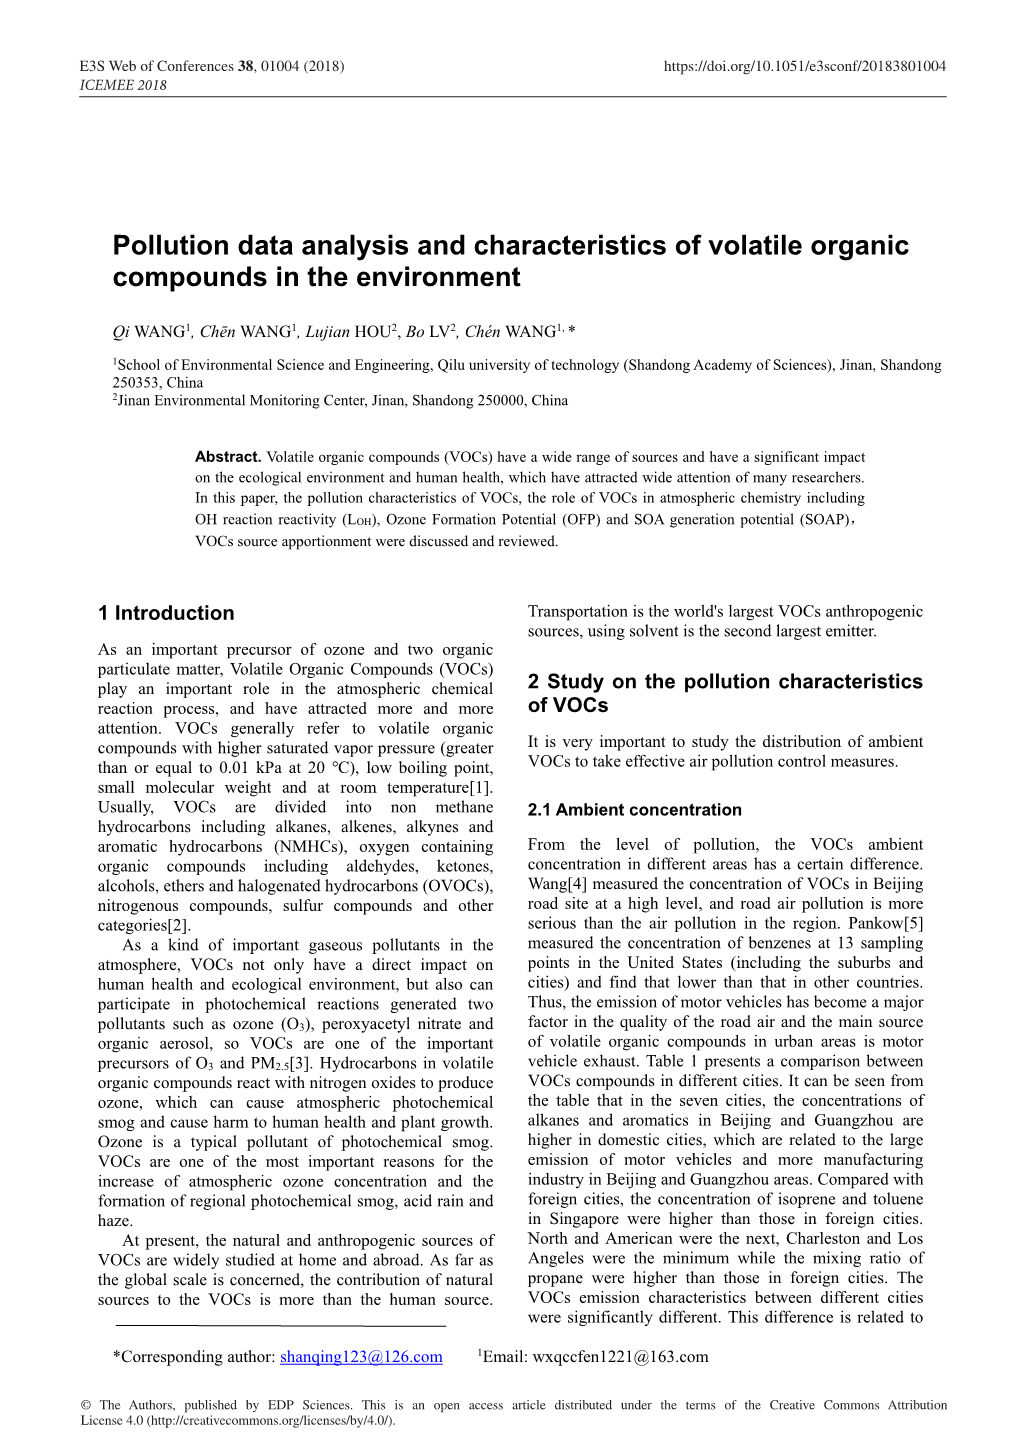 Pollution Data Analysis and Characteristics of Volatile Organic Compounds in the Environment